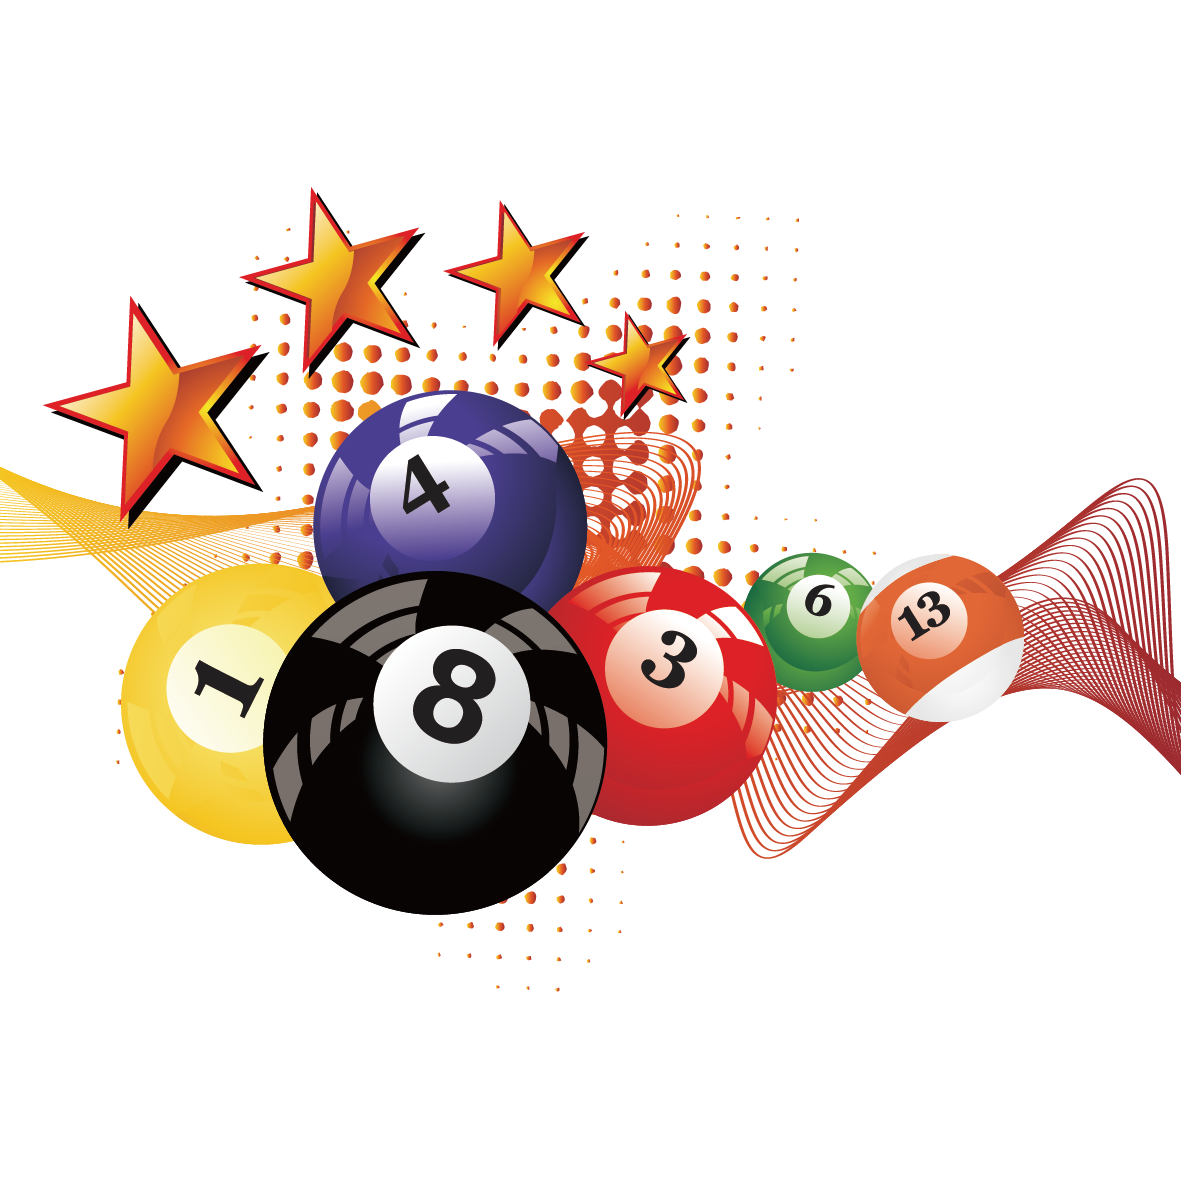 8 Ball Pool PNG Transparent Images Free Download